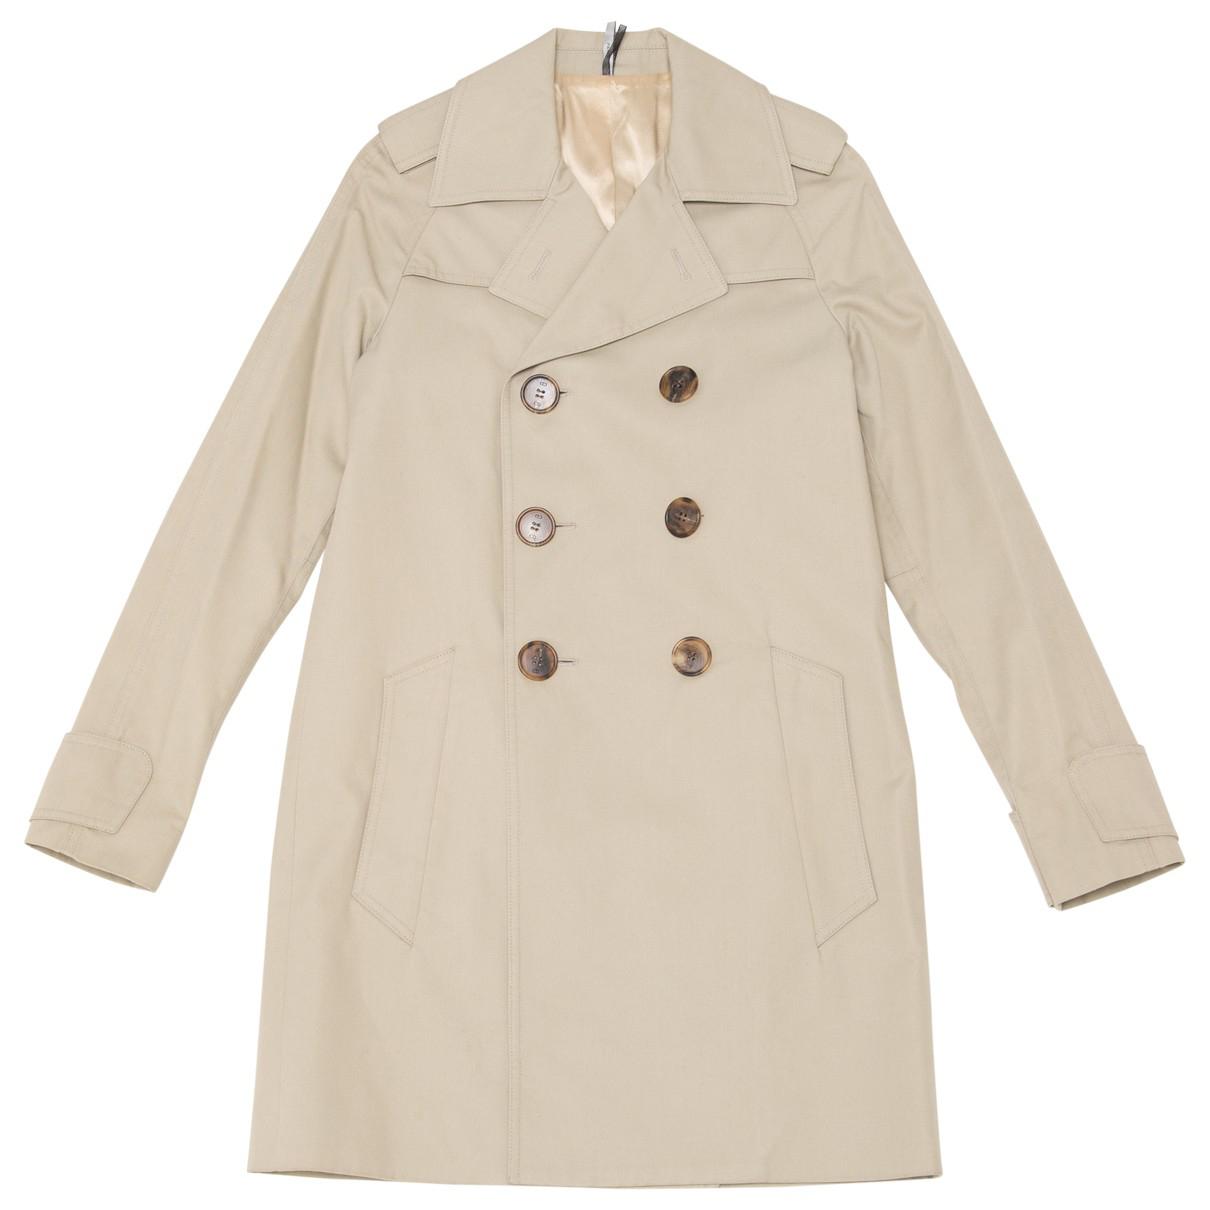 Lyst - Dior Beige Polyester Trench Coat in Natural